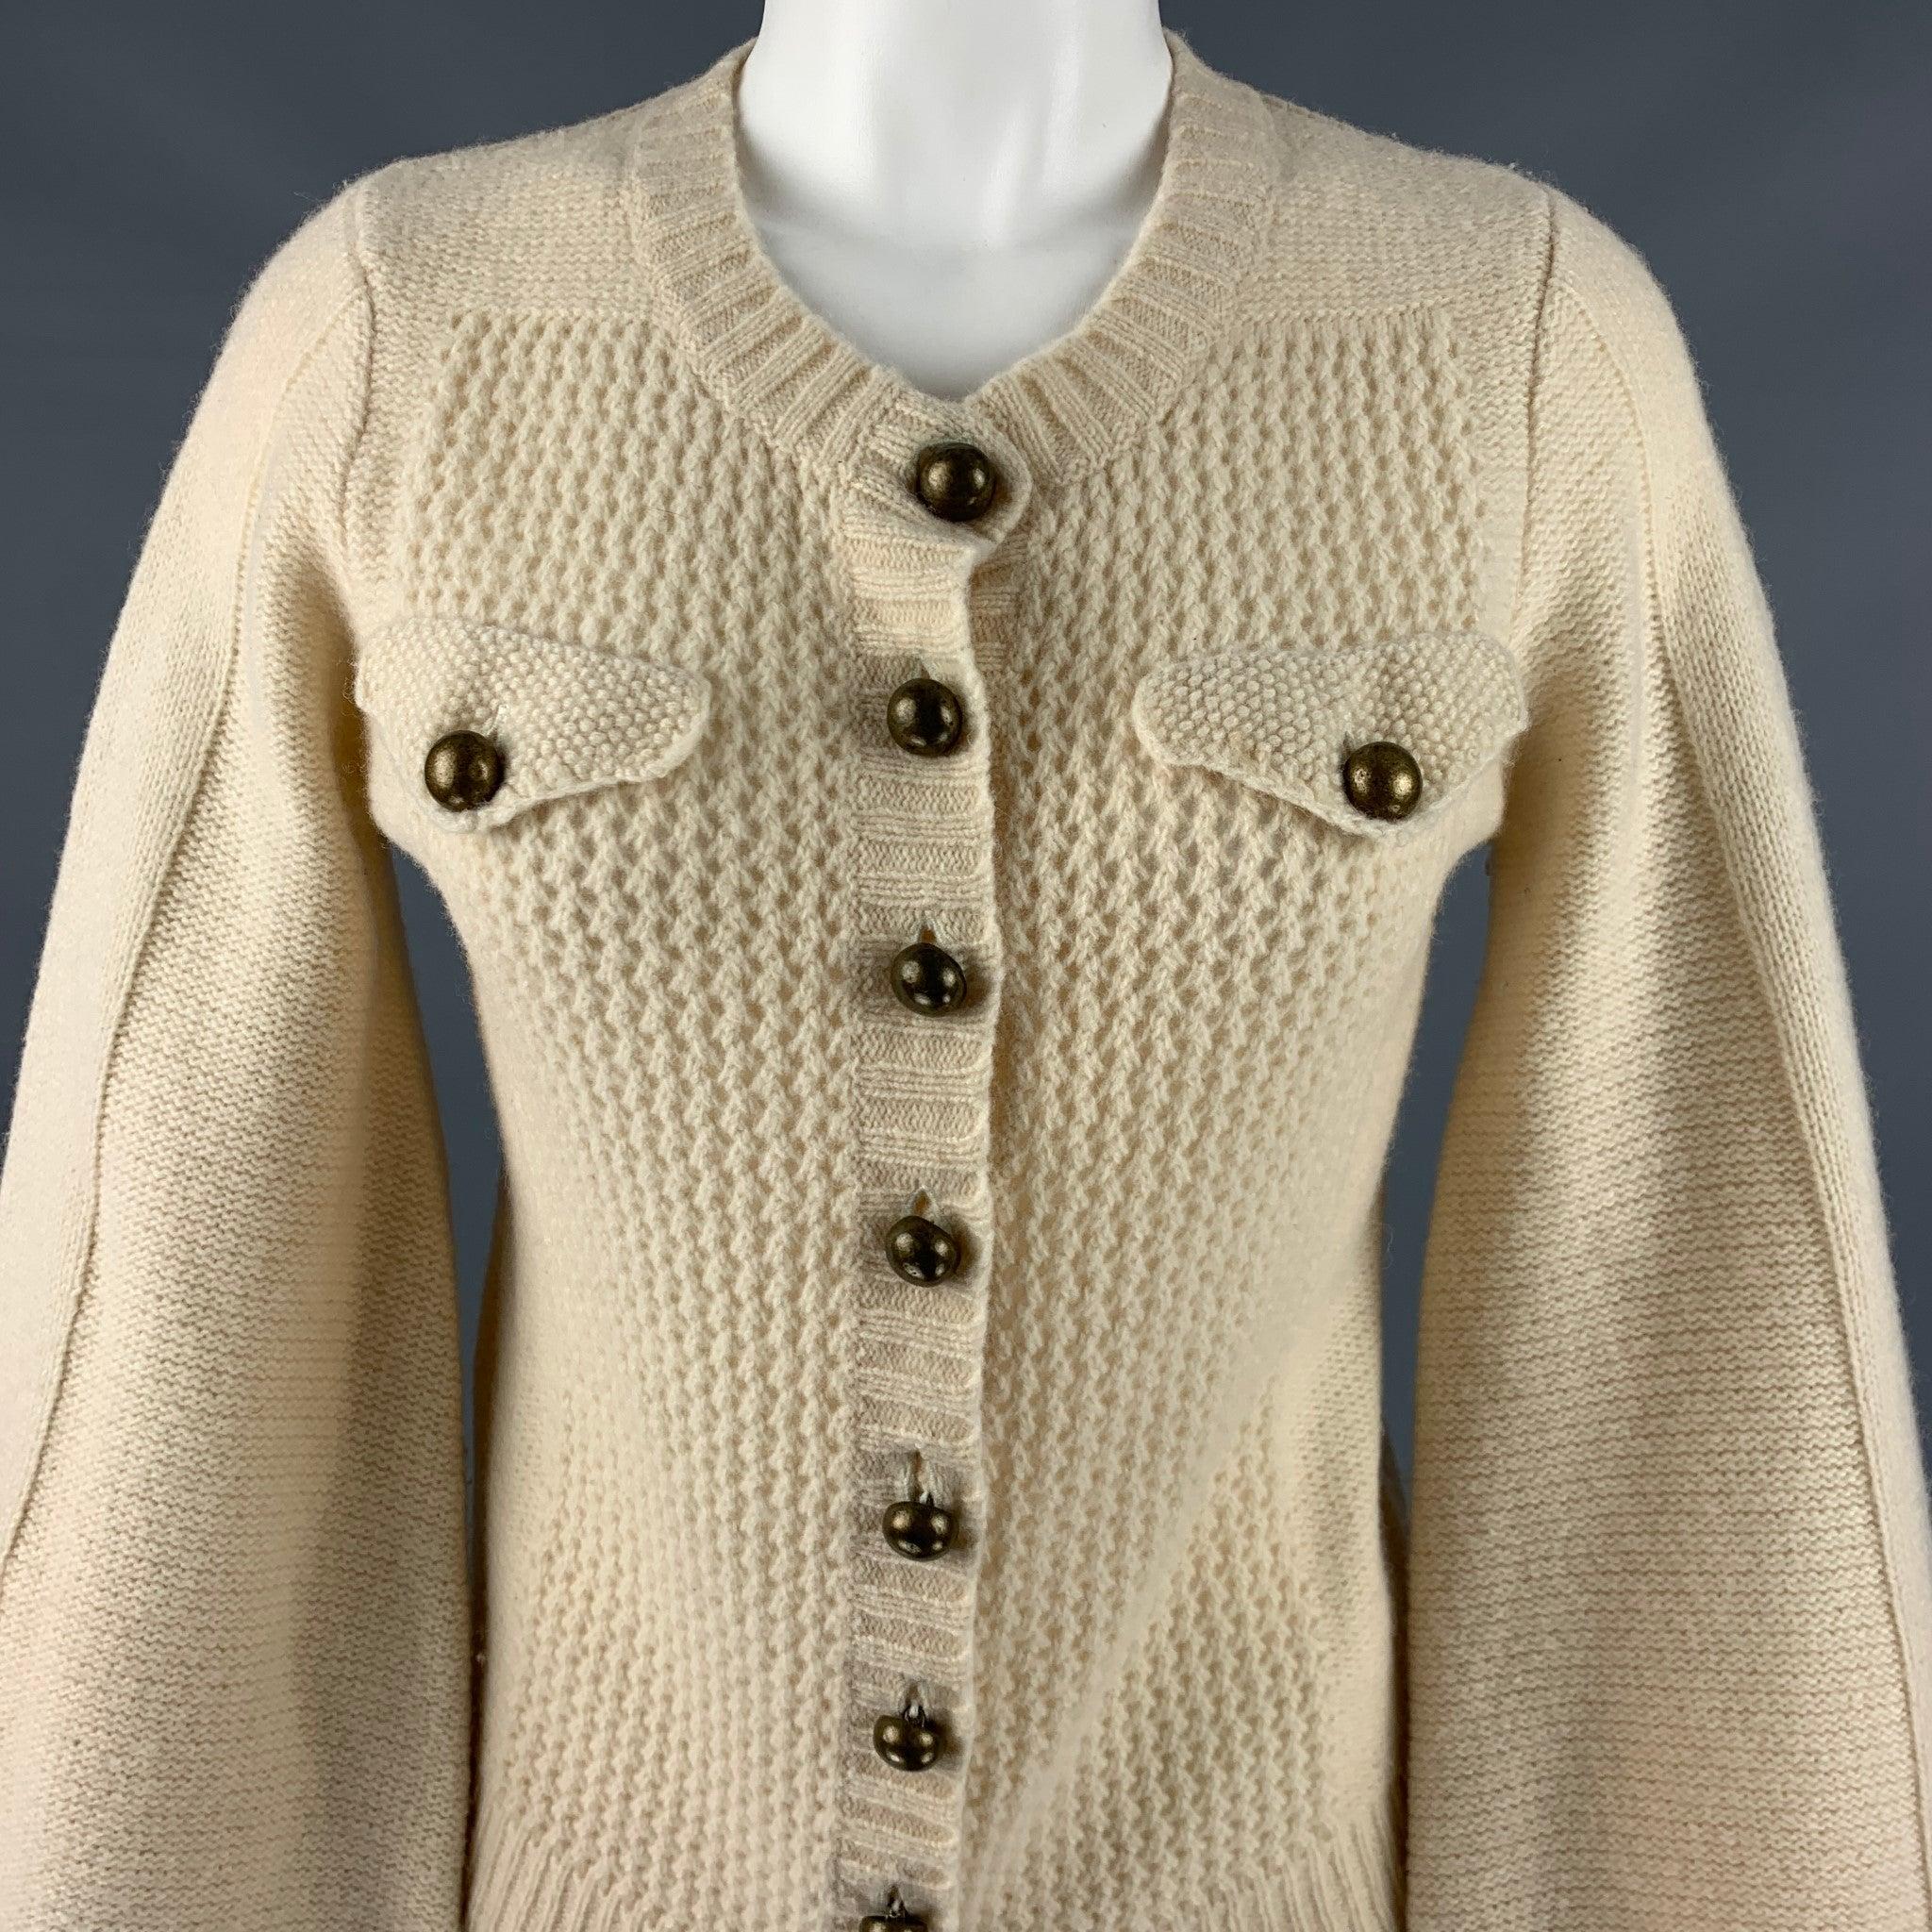 MARC JACOBS
casual top in a
cream wool knit featuring contrasting knit textures, see through front and back, large brass buttons, balloon sleeves, and a button closure.Very Good Pre-Owned Condition. Minor discoloration around buttonholes, and minor